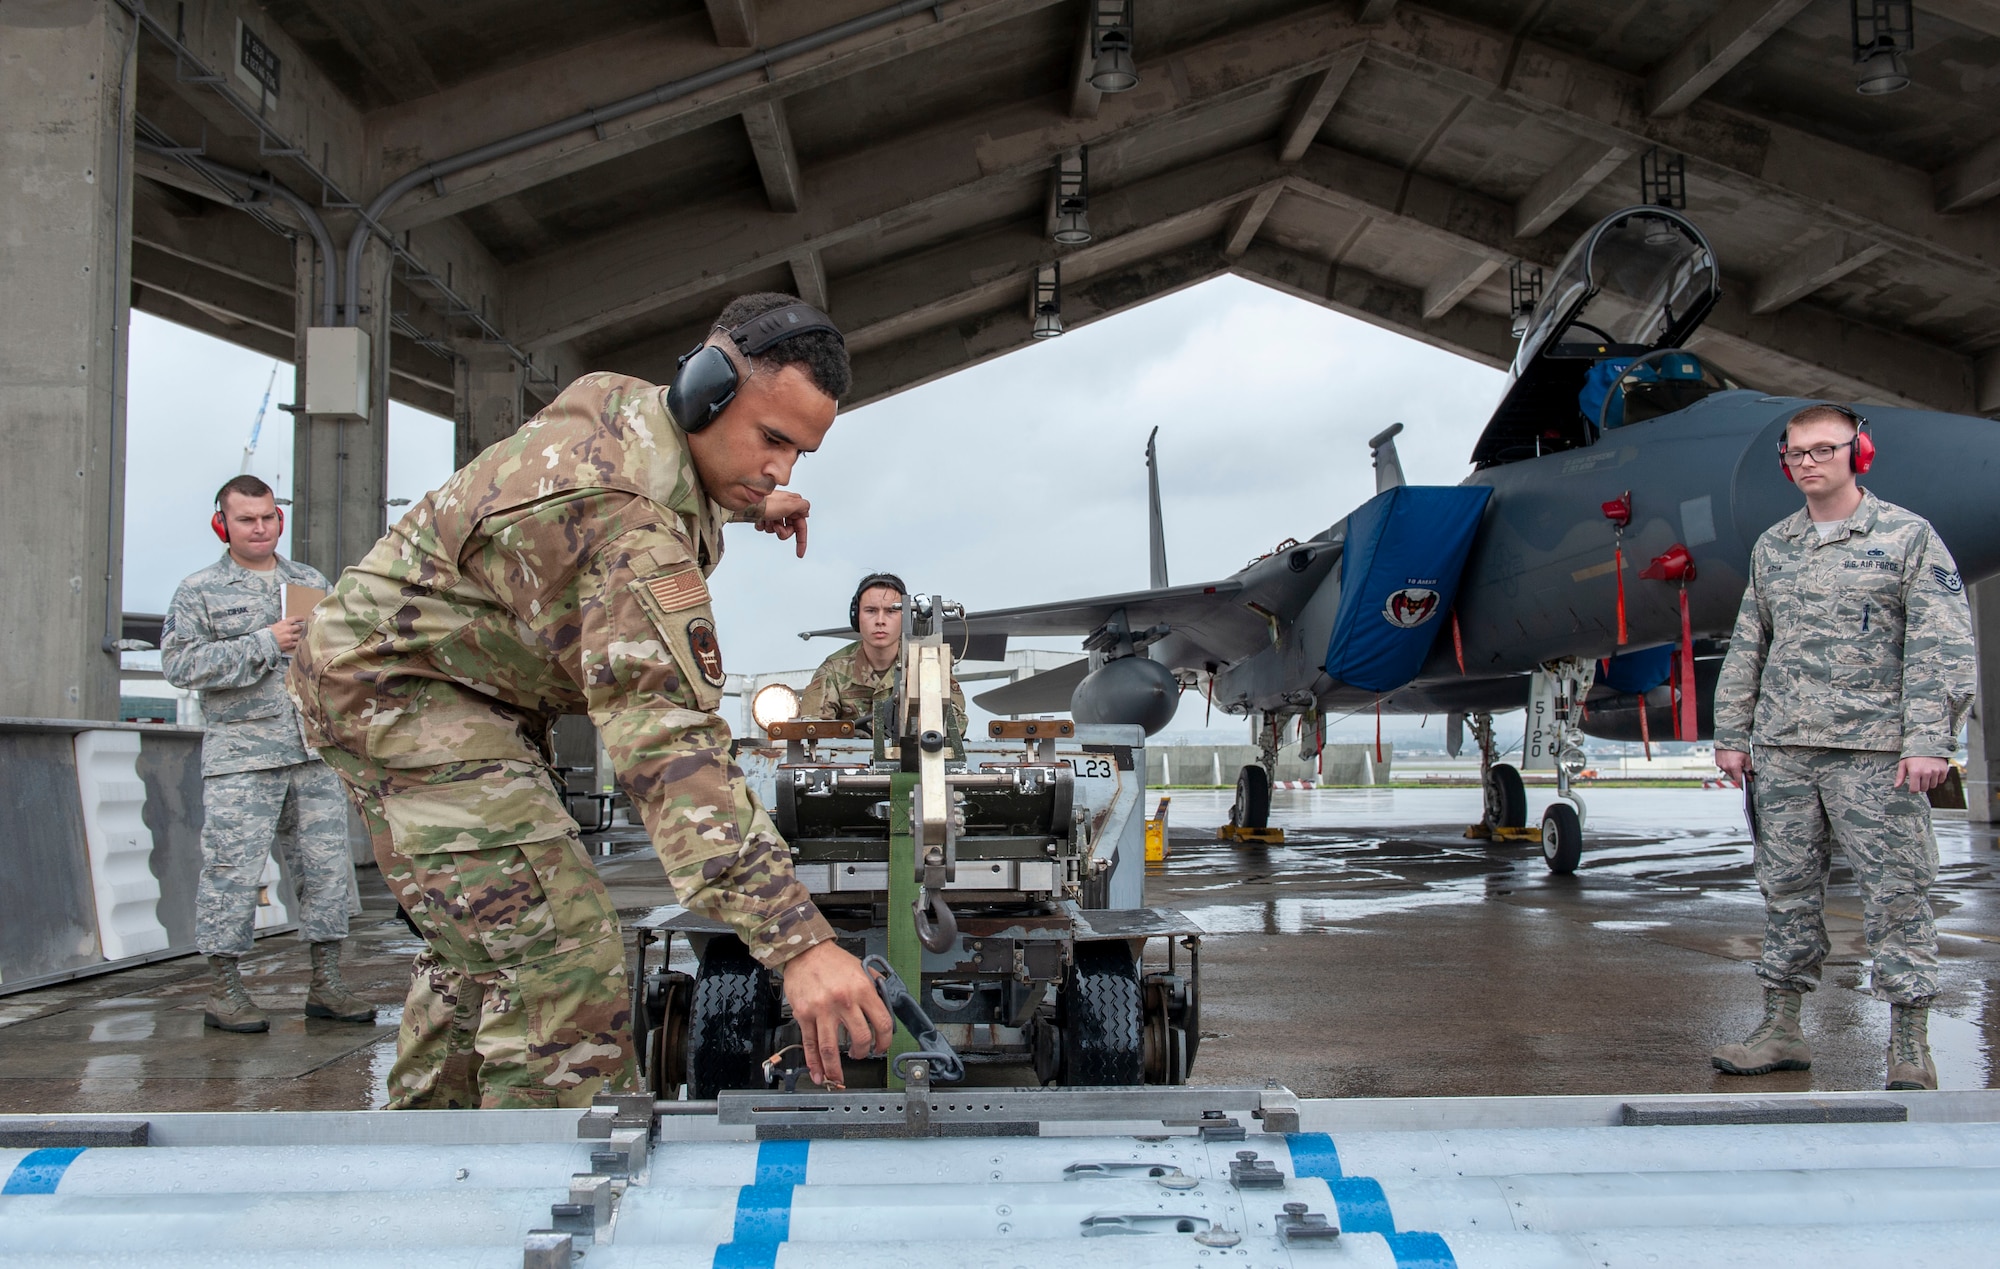 U.S. Air Force Staff Sgt. Jacob Wigfall, 44th Aircraft Maintenance Unit load crew chief, signals to Senior Airman Edward Bennett, 44th AMU load crew member, while loading an AIM-120 advanced medium-range air-to-air missile onto an MJ-1C lift truck during the annual weapons load competition at Kadena Air Base, Japan, Jan. 17, 2020. This competition featured four teams competing for the 18th Wing’s best load crew of the year. (U.S. Air Force photo by Naoto Anazawa)